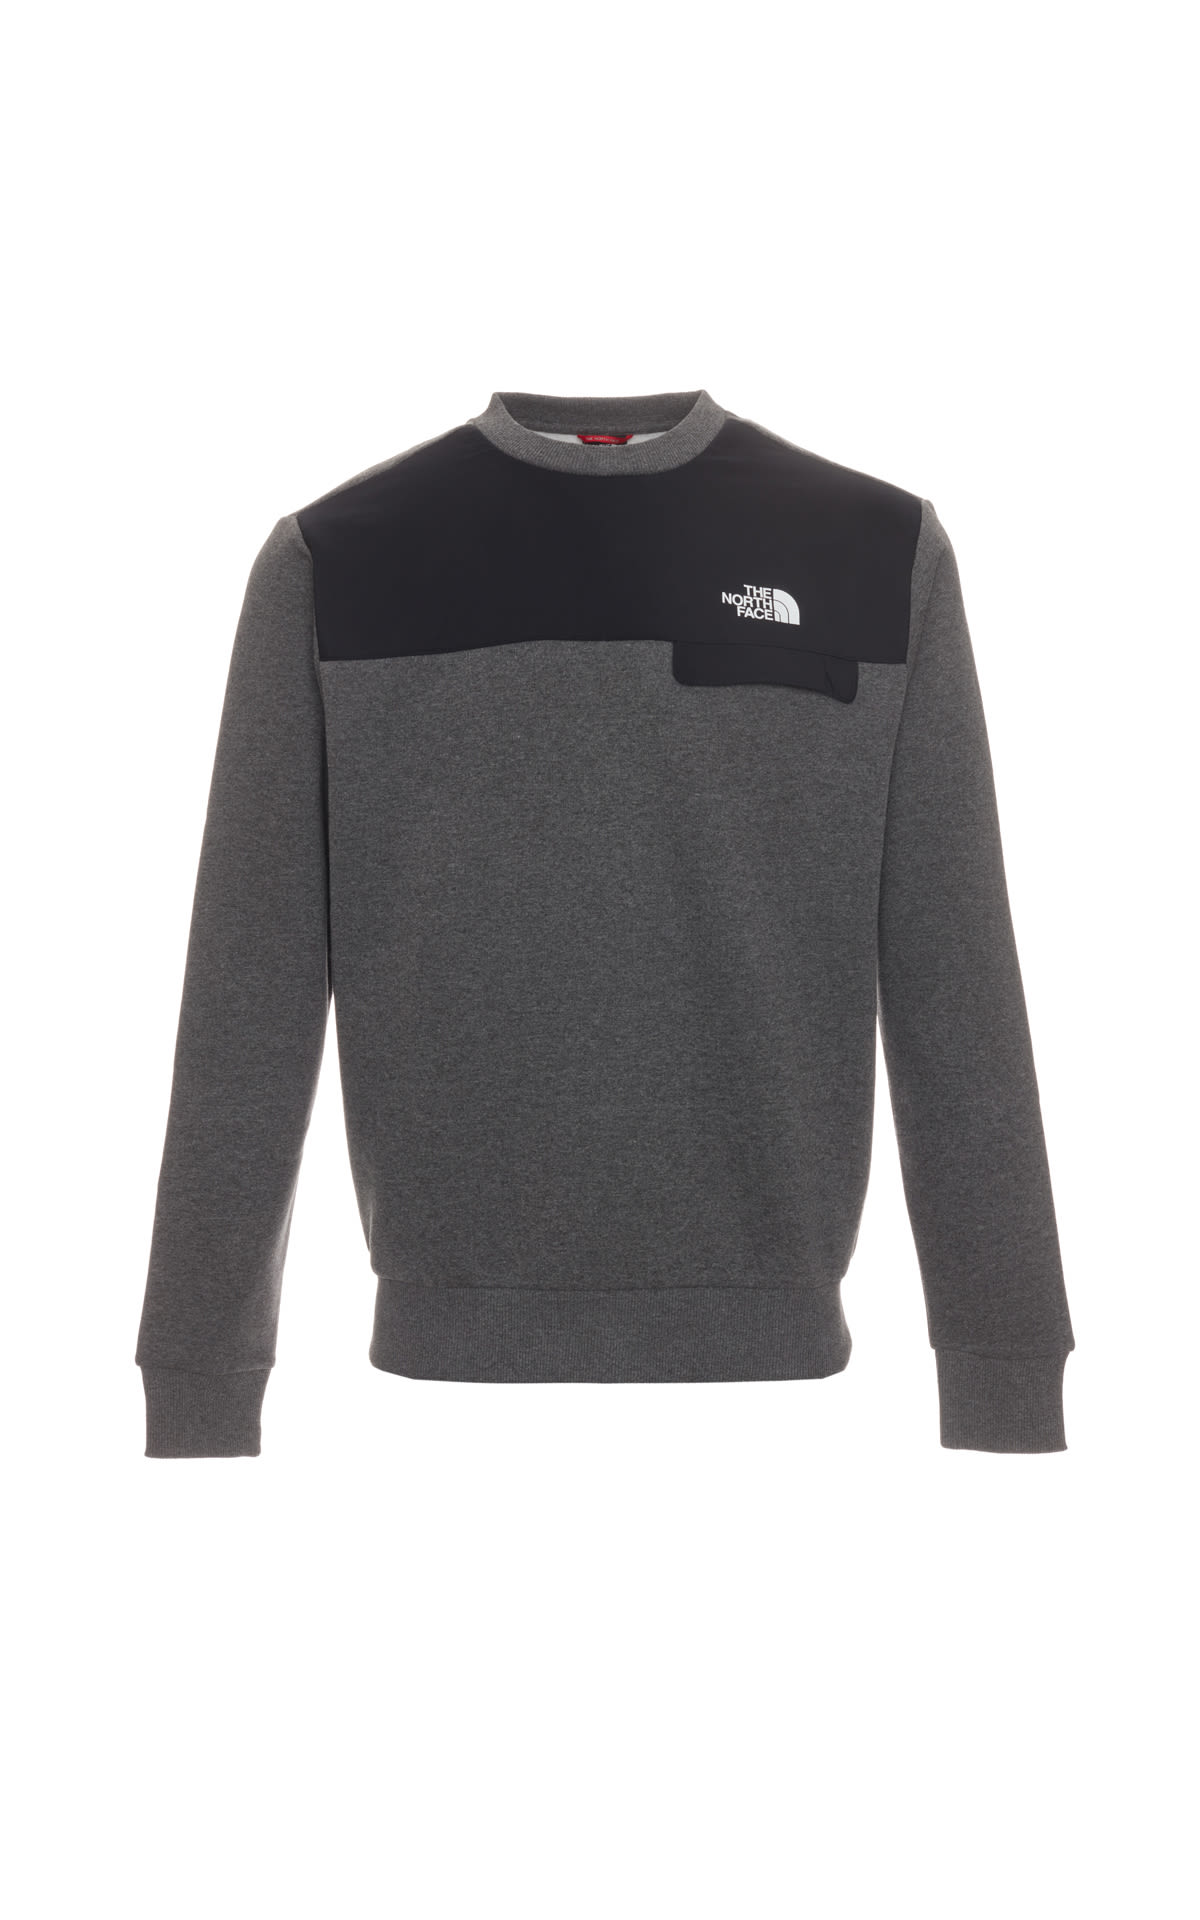 The North Face Crewneck sweatshirt from Bicester Village